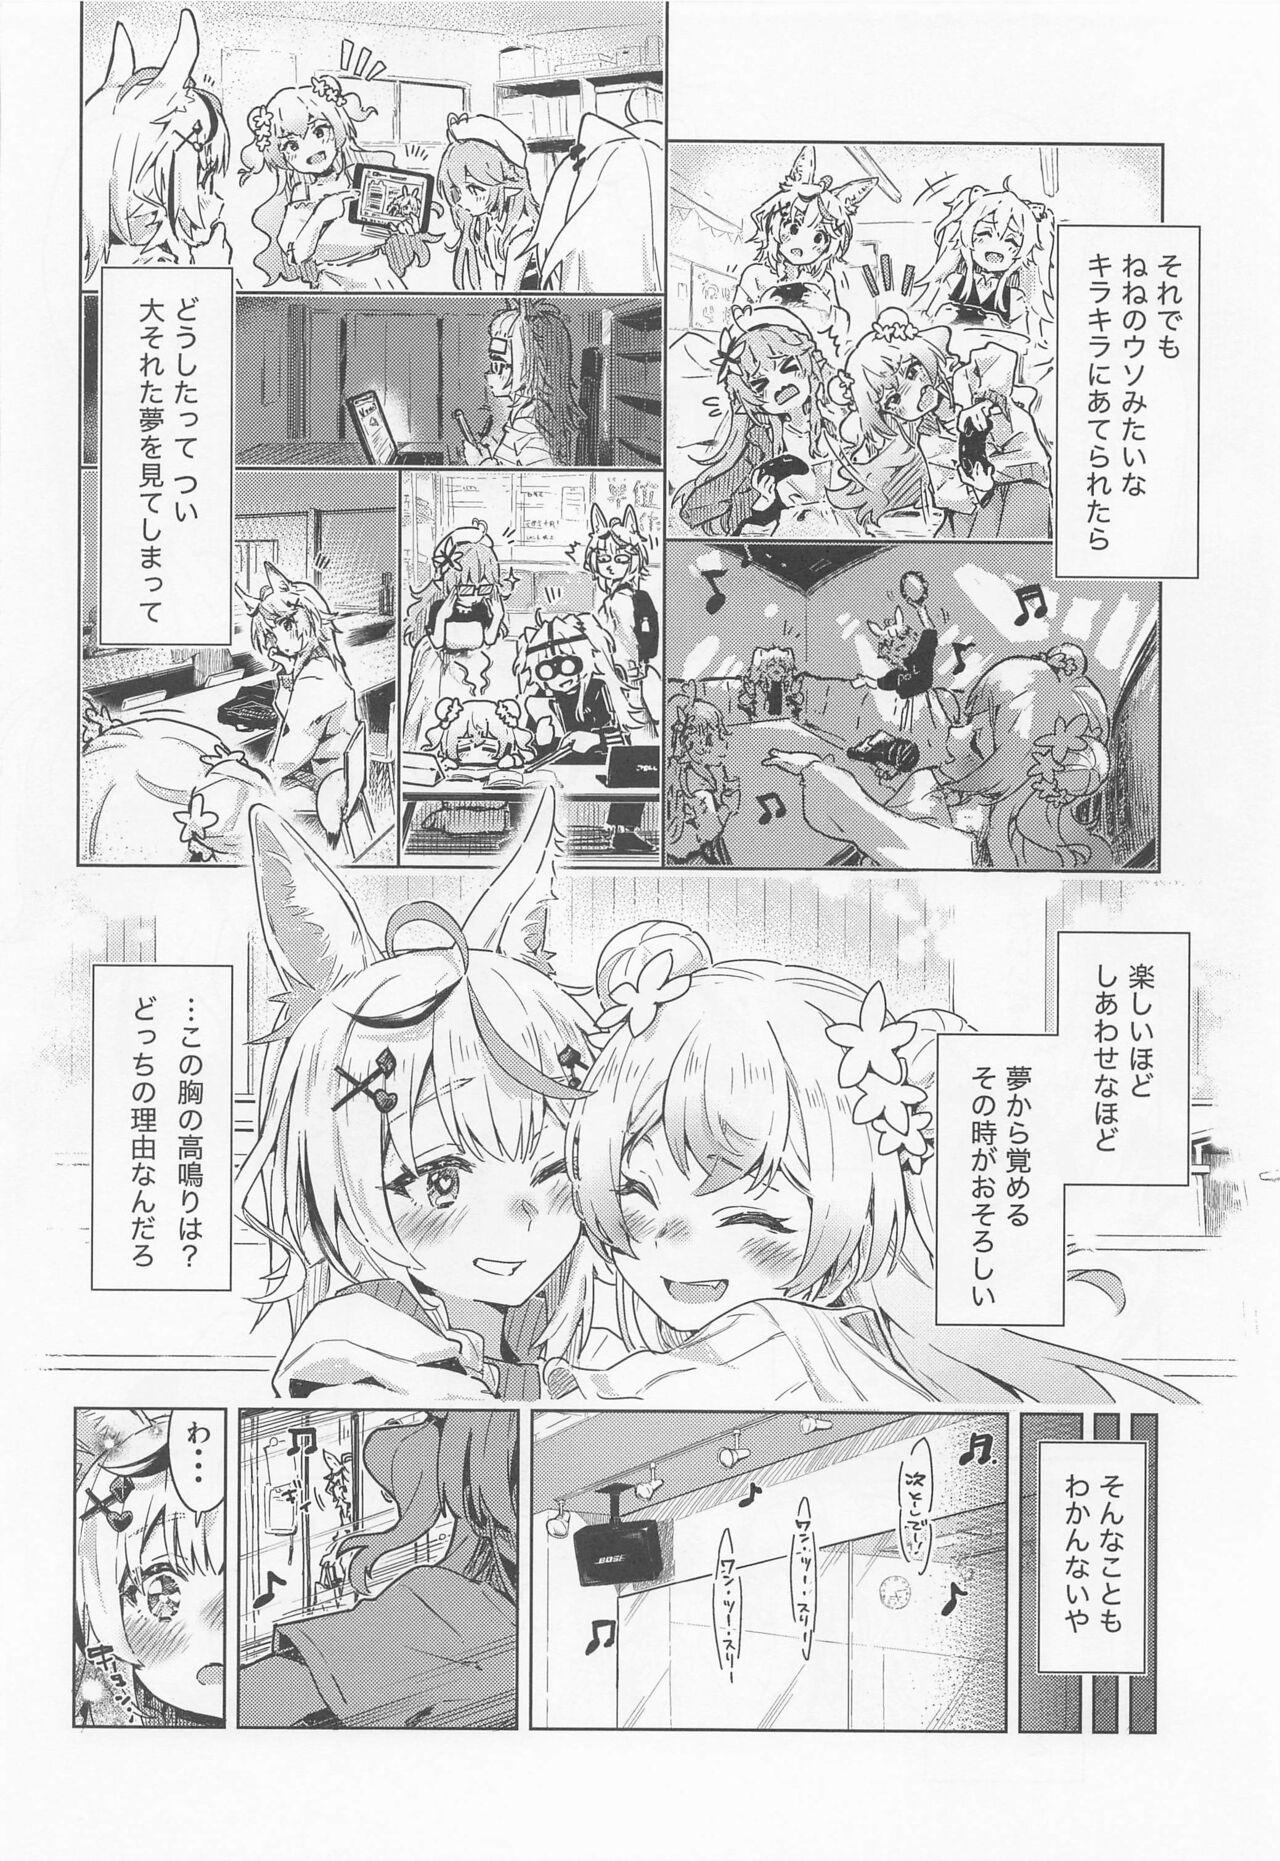 Hardcore Porno Fennec wa Iseijin no Yume o Miru ka - Does The Fennec Dream of The Lovely Visitor? - Hololive Cruising - Page 5